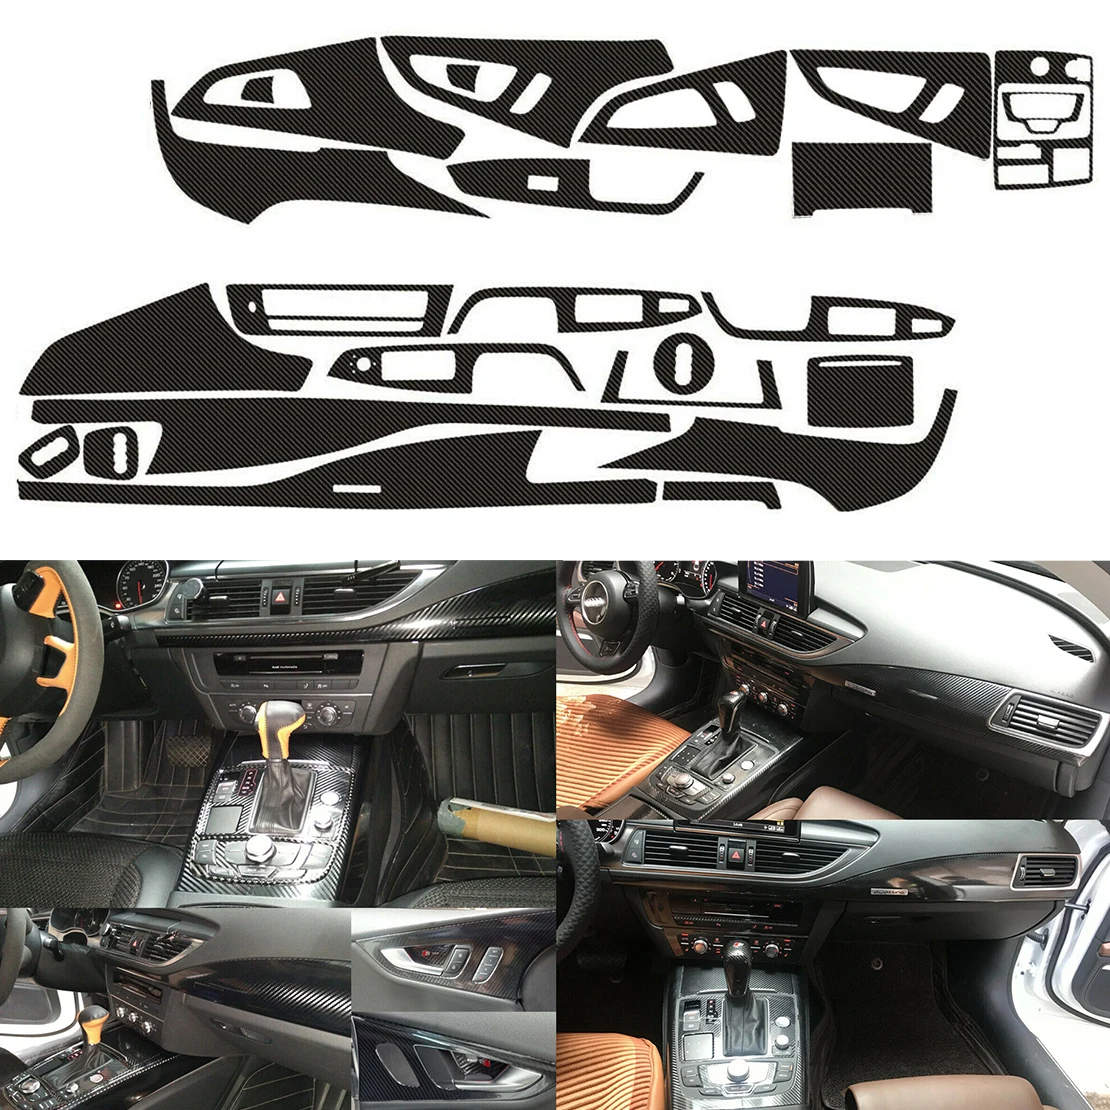 5D Car Interior Dashboard Console Gear Panel Molding Sticker Kit Carbon Fiber Style Fit for Audi A7 2011-2018 Left Hand Drive